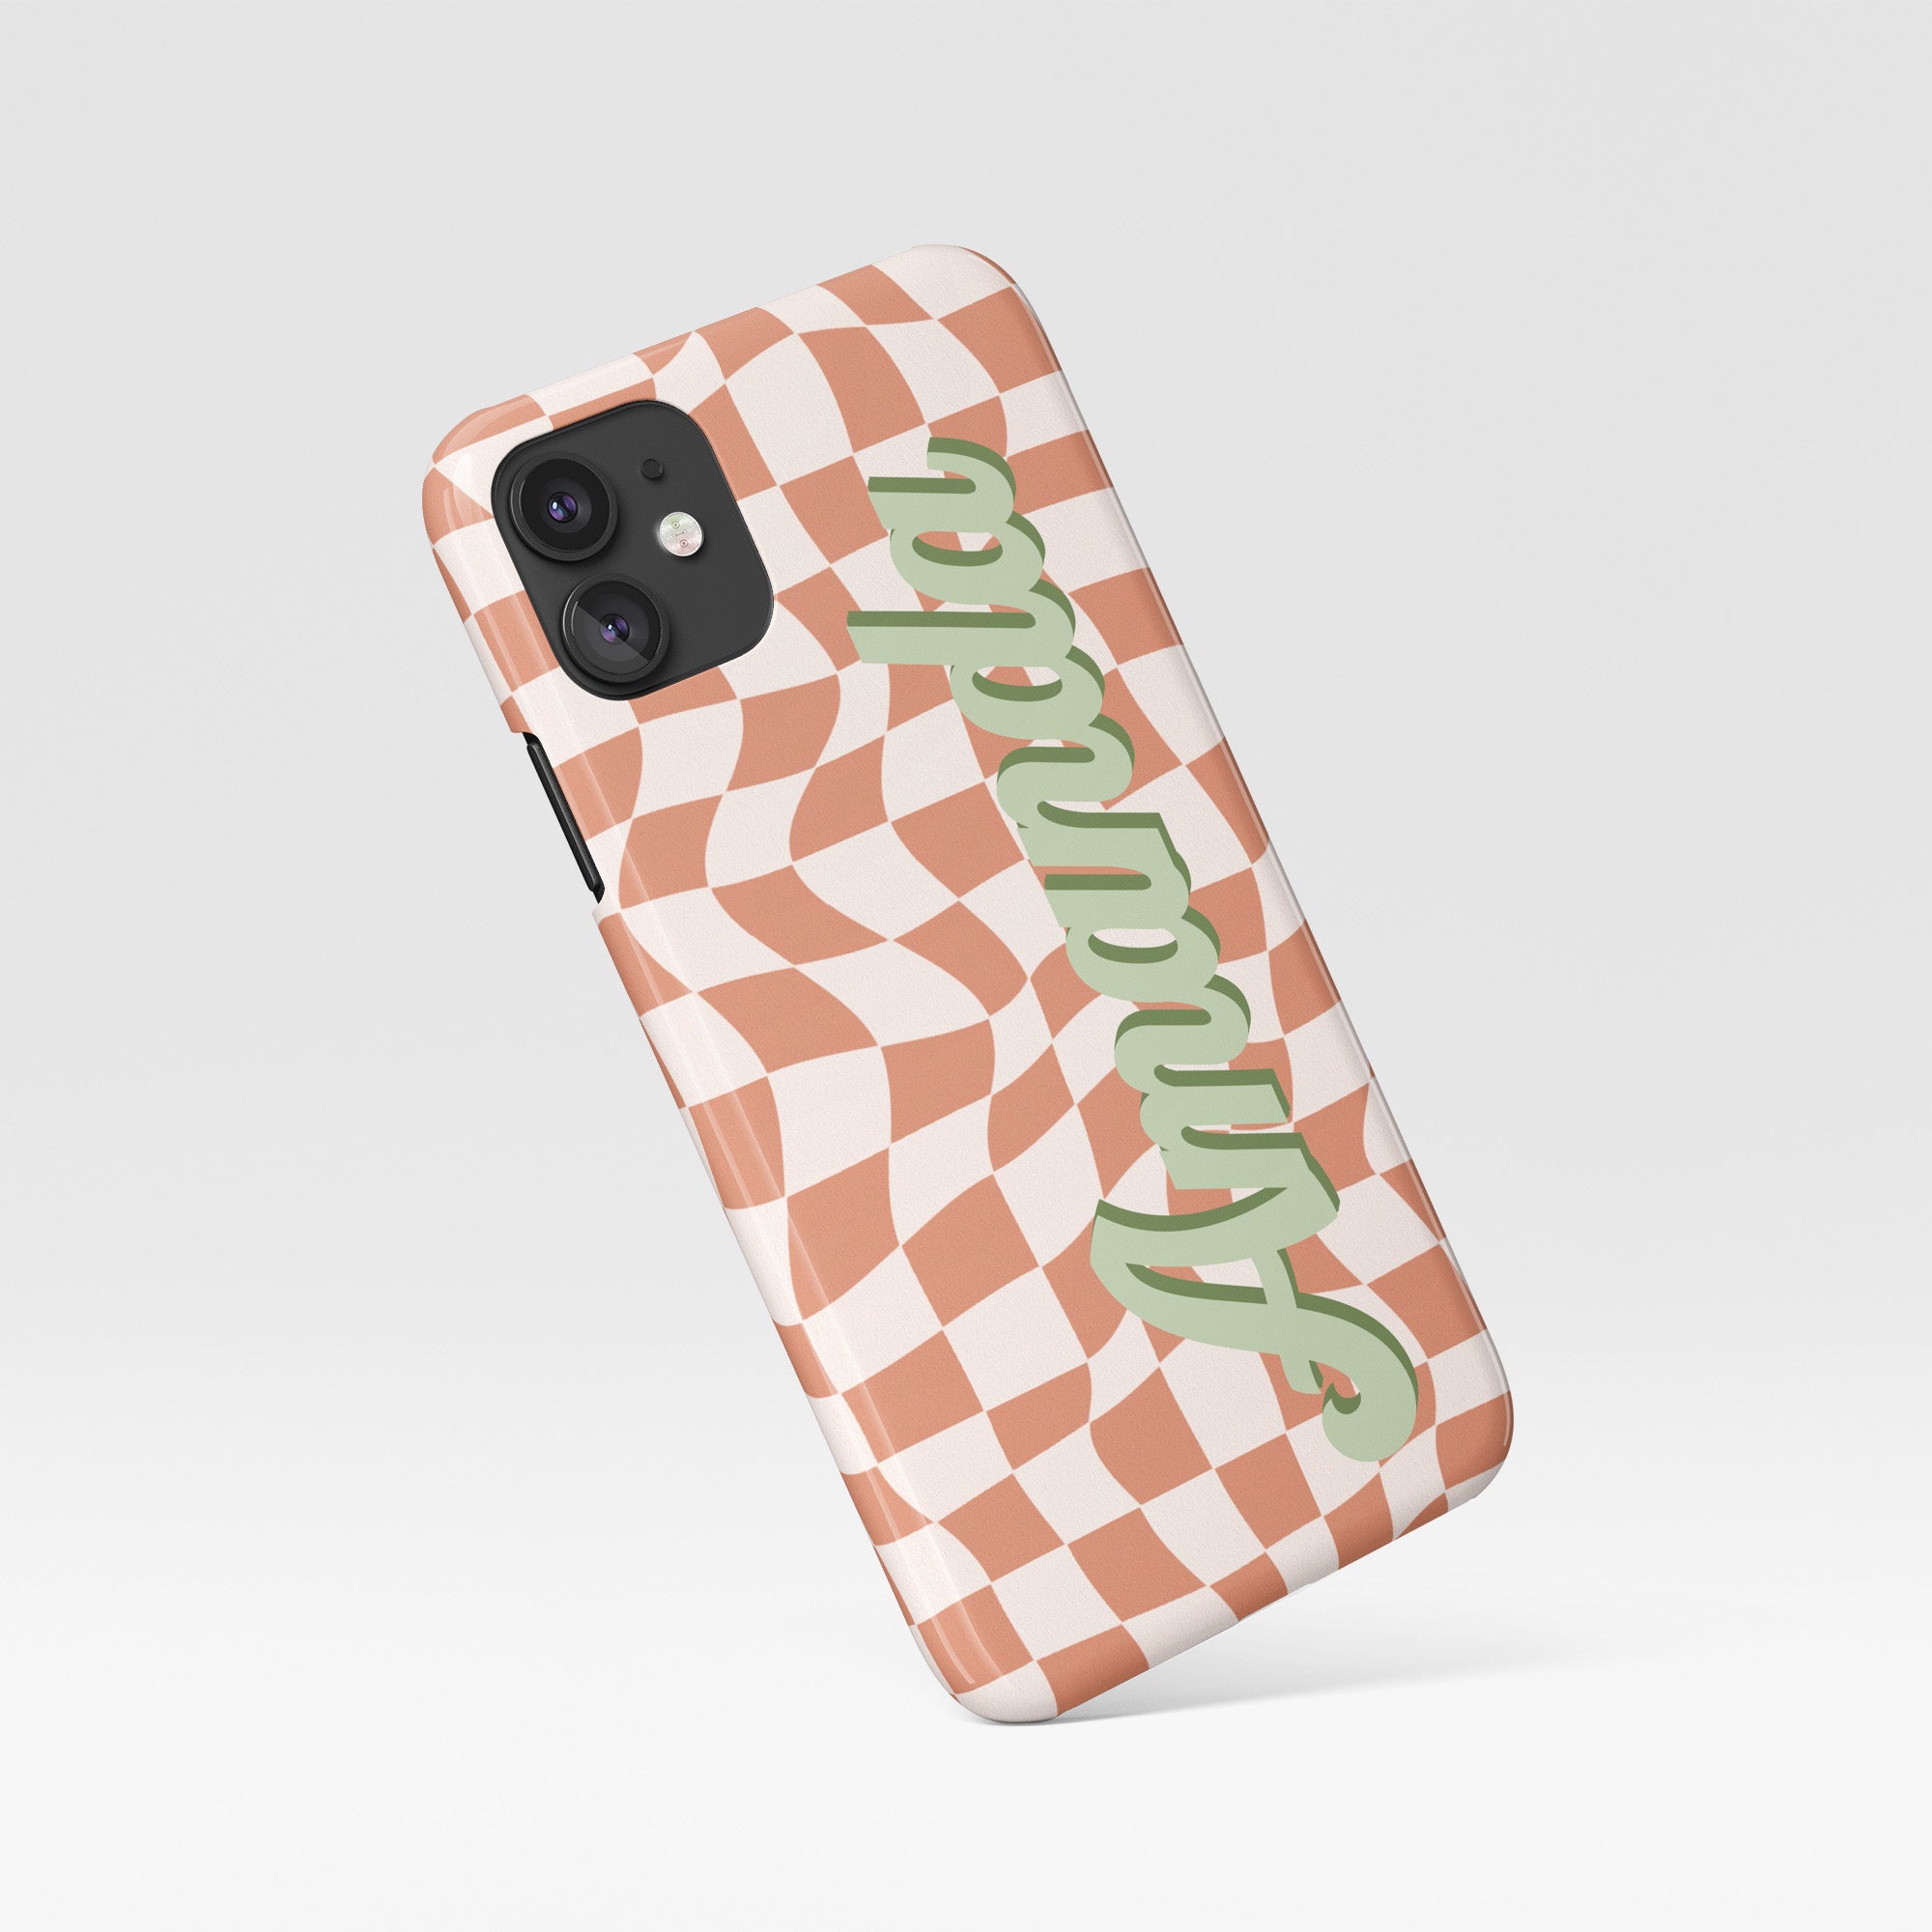 LOUIS VUITTON LOGO GREEN ICON PATTERN iPhone 13 Pro Max Case Cover